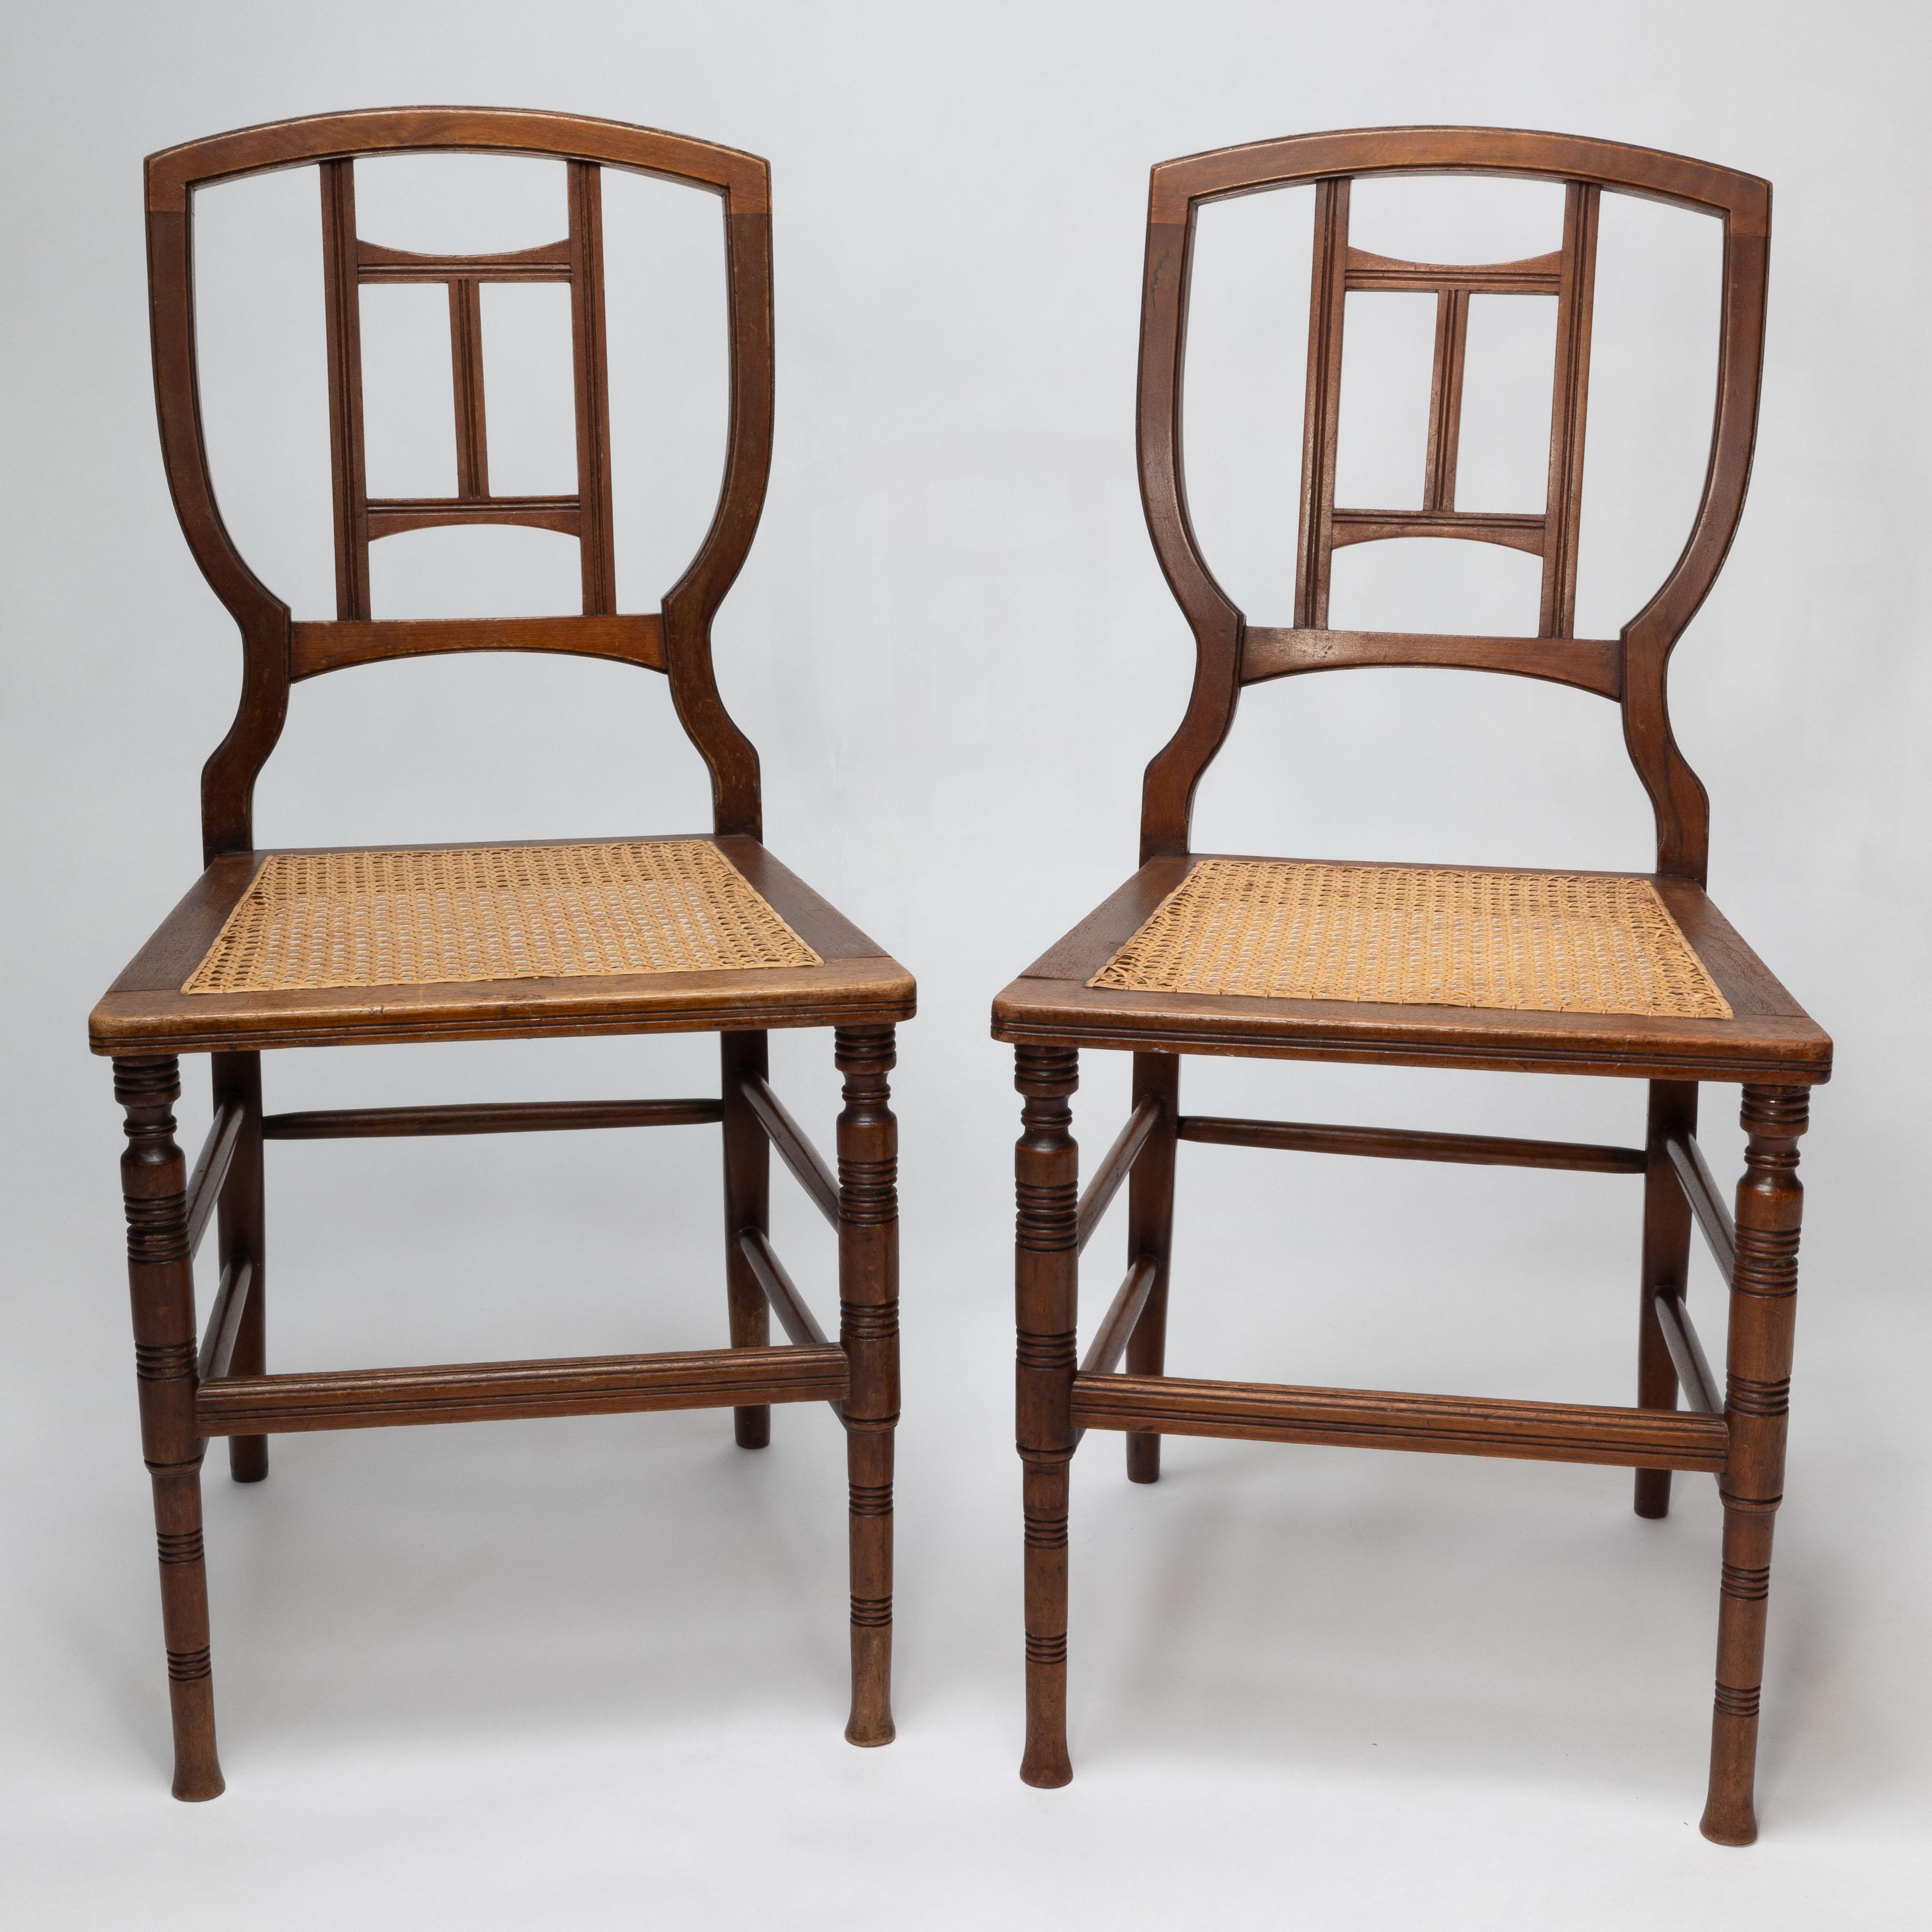 Henry William Batley attributed for Jas Shoolbred & Co. A pair of Aesthetic Movement cane seat beech side chairs. 
Stamped under the seat Jas Shoolbred and the production number 820
